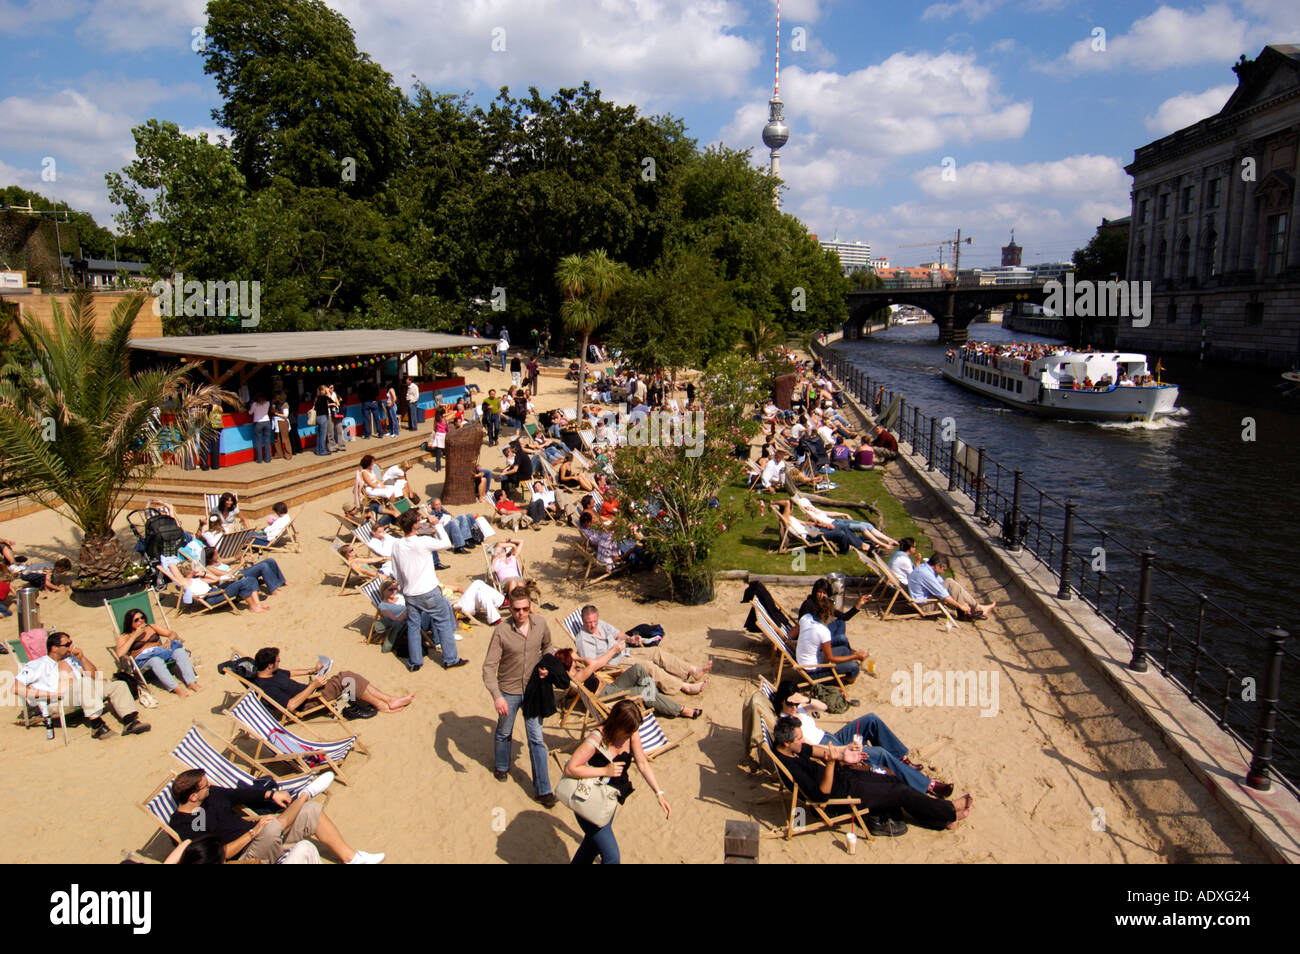 People throng a sandy city beach built in beside the Spree River in central Berlin Stock Photo